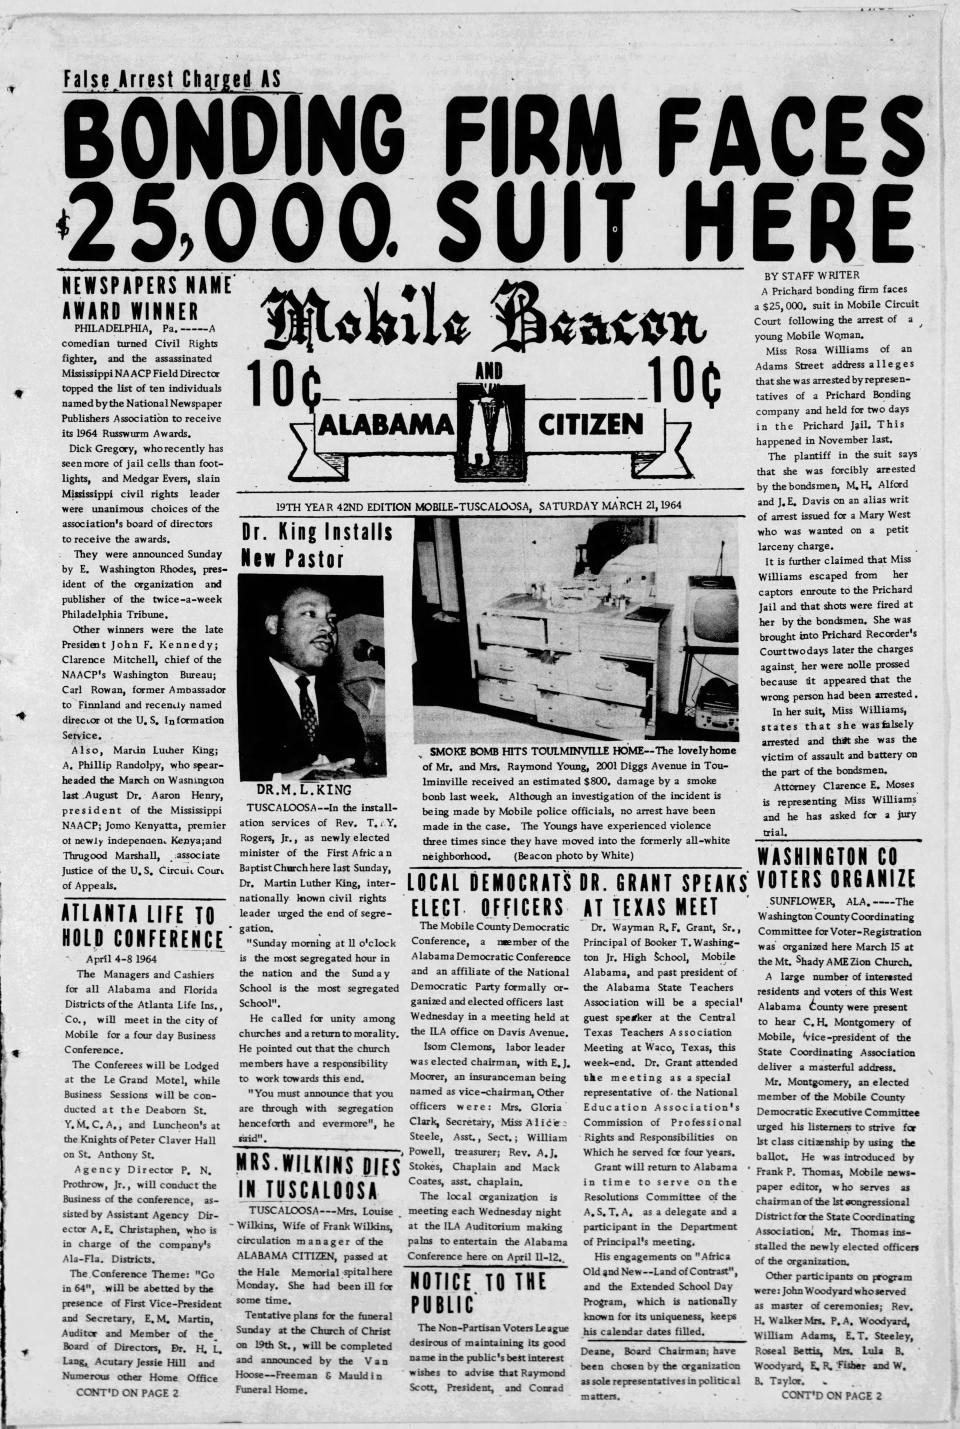 The Rev. Martin Luther King Jr.’s Tuscaloosa visit made the front page of the March 21, 1964, edition of The Mobile Beacon/Alabama Citizen, an African-American newspaper.